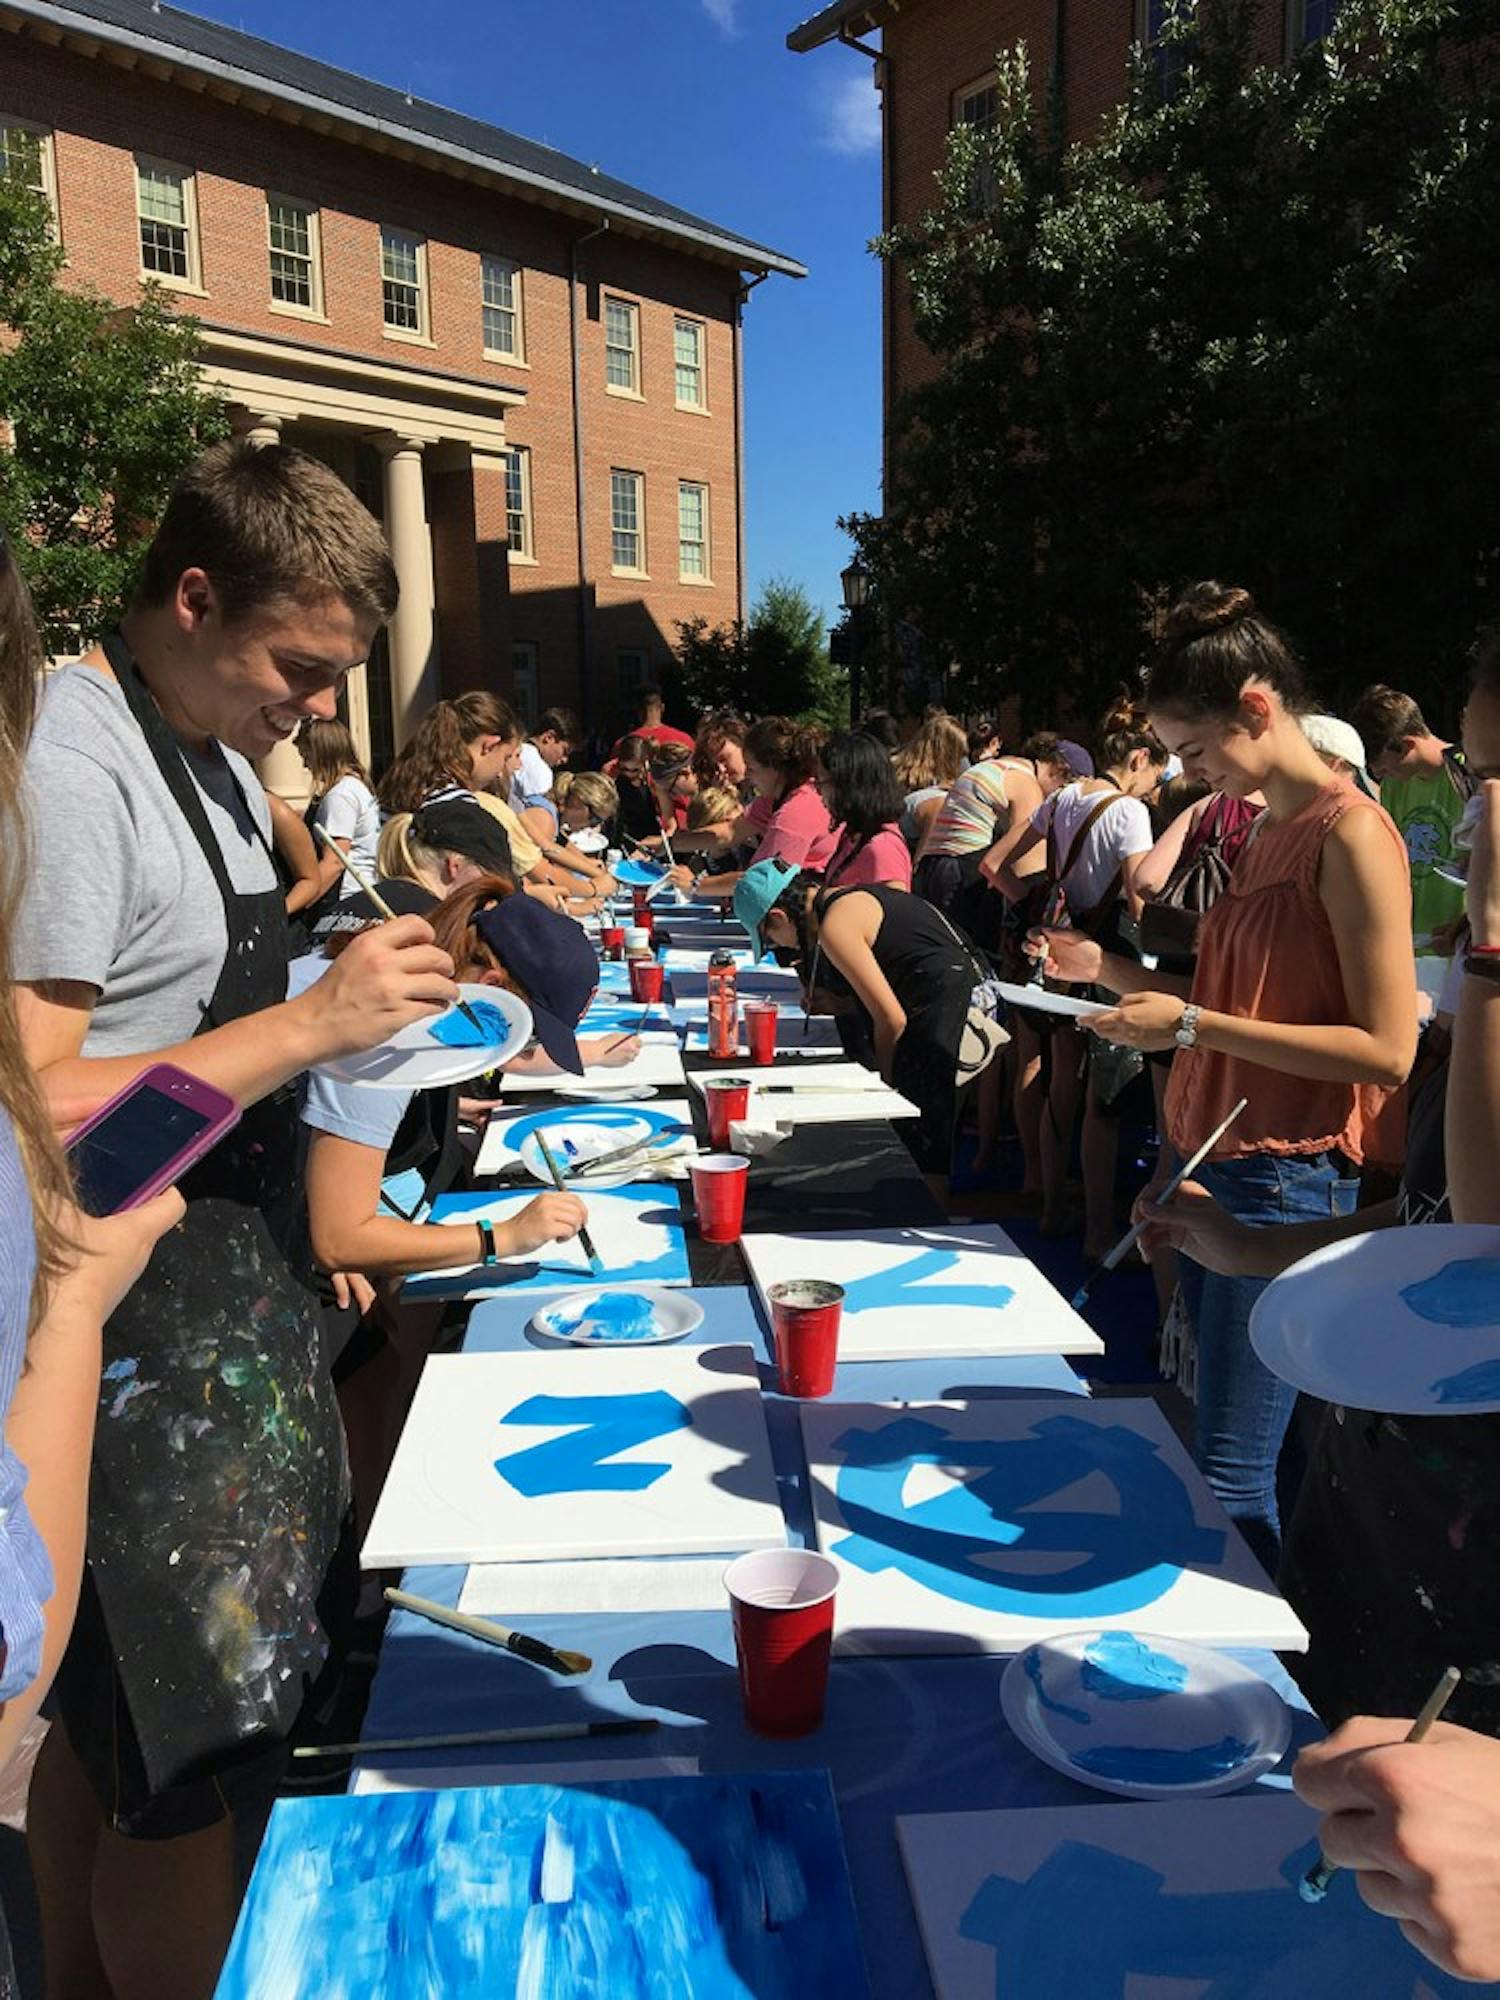 Students partake in "Paint a Picture of Your Carolina",&nbsp;a Week of Welcome event, led by the&nbsp;Wine & Design group.&nbsp;Photo Courtesy of Roslyn Sloop-Troutman.